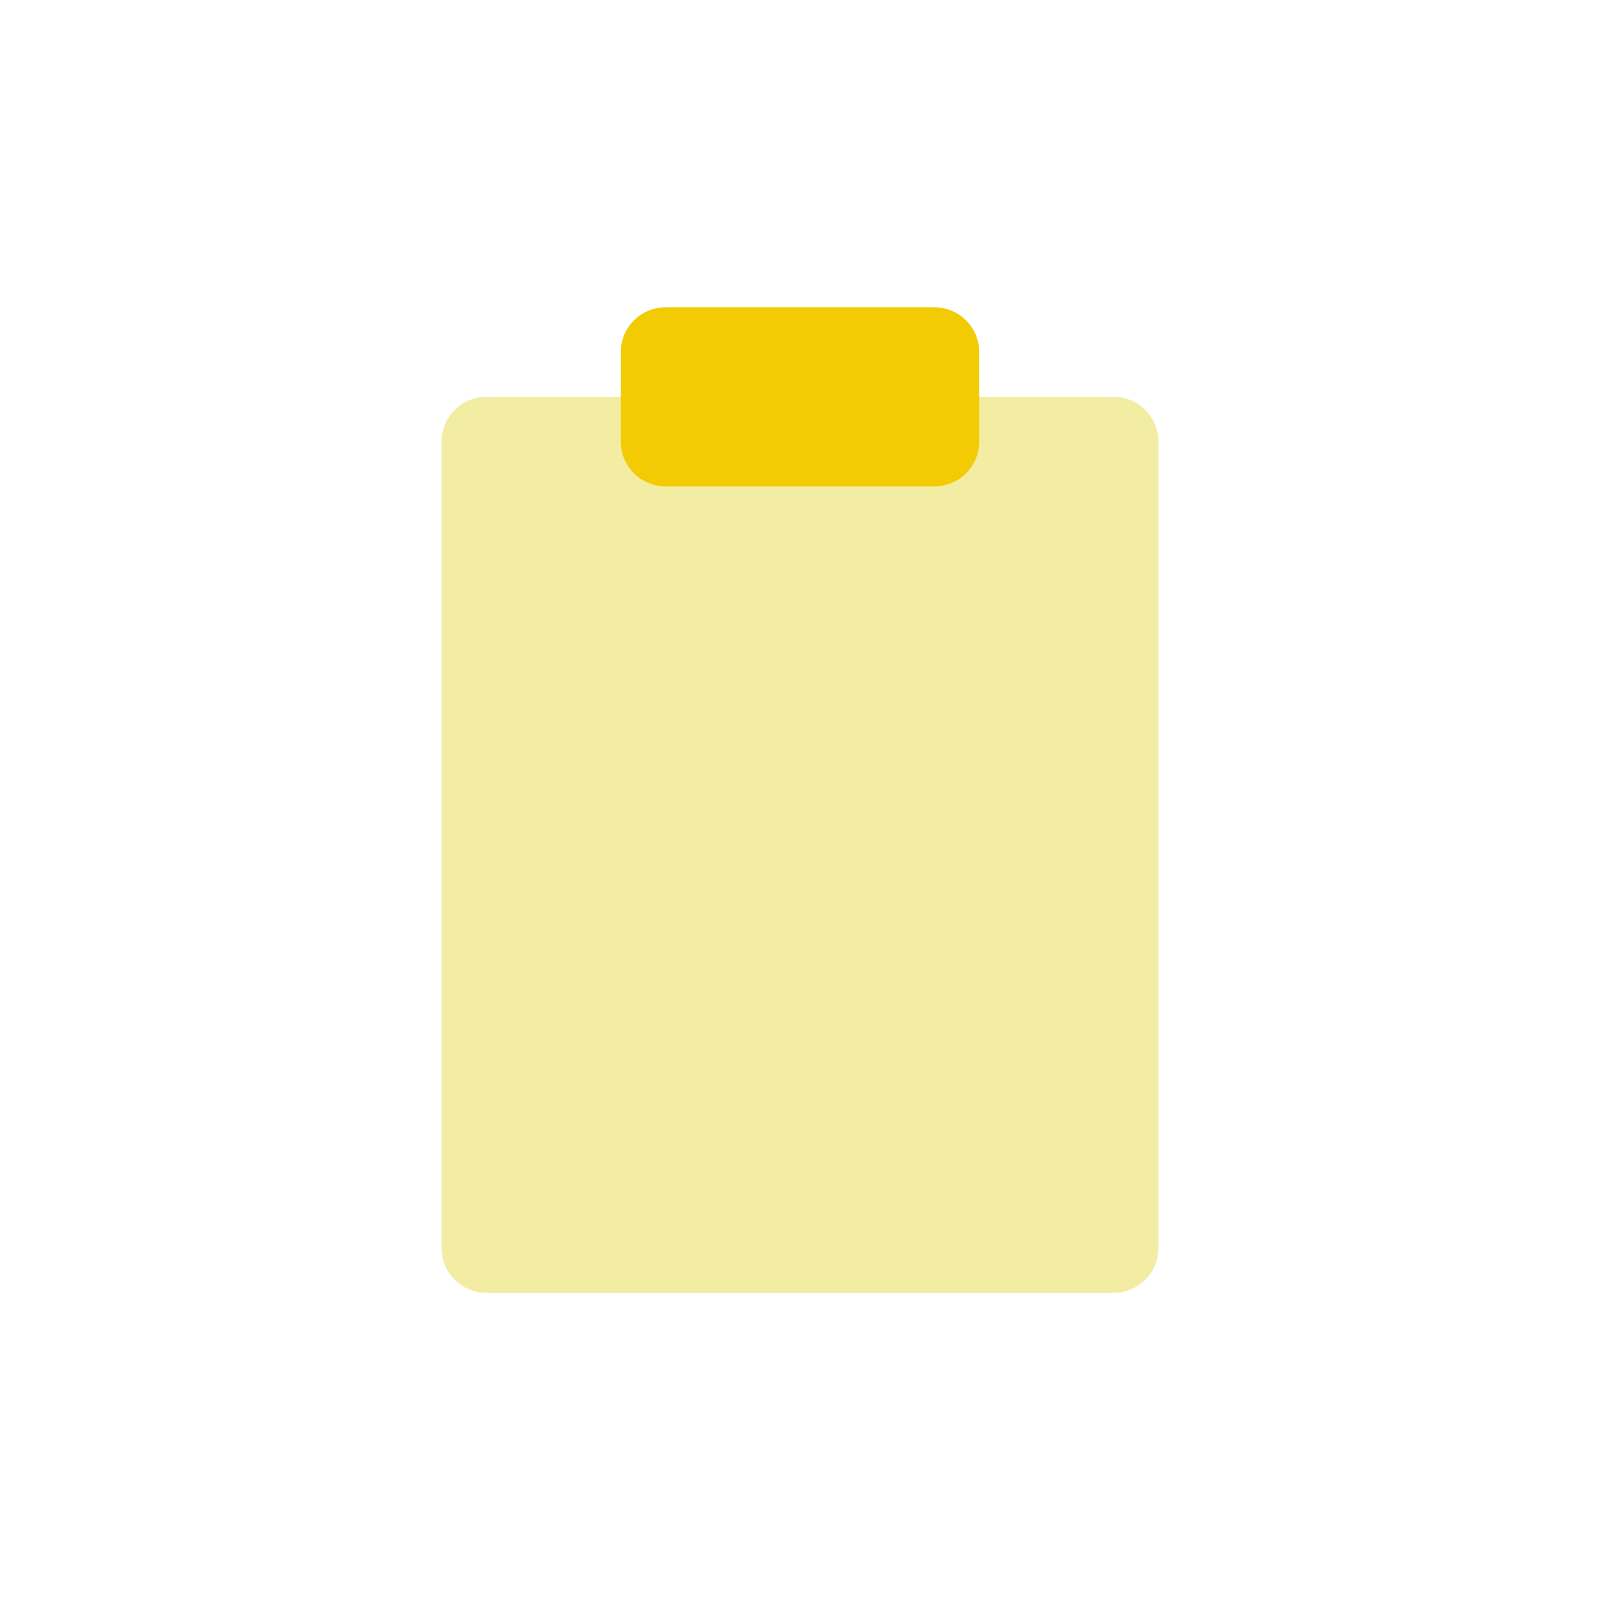 Blank Table icon